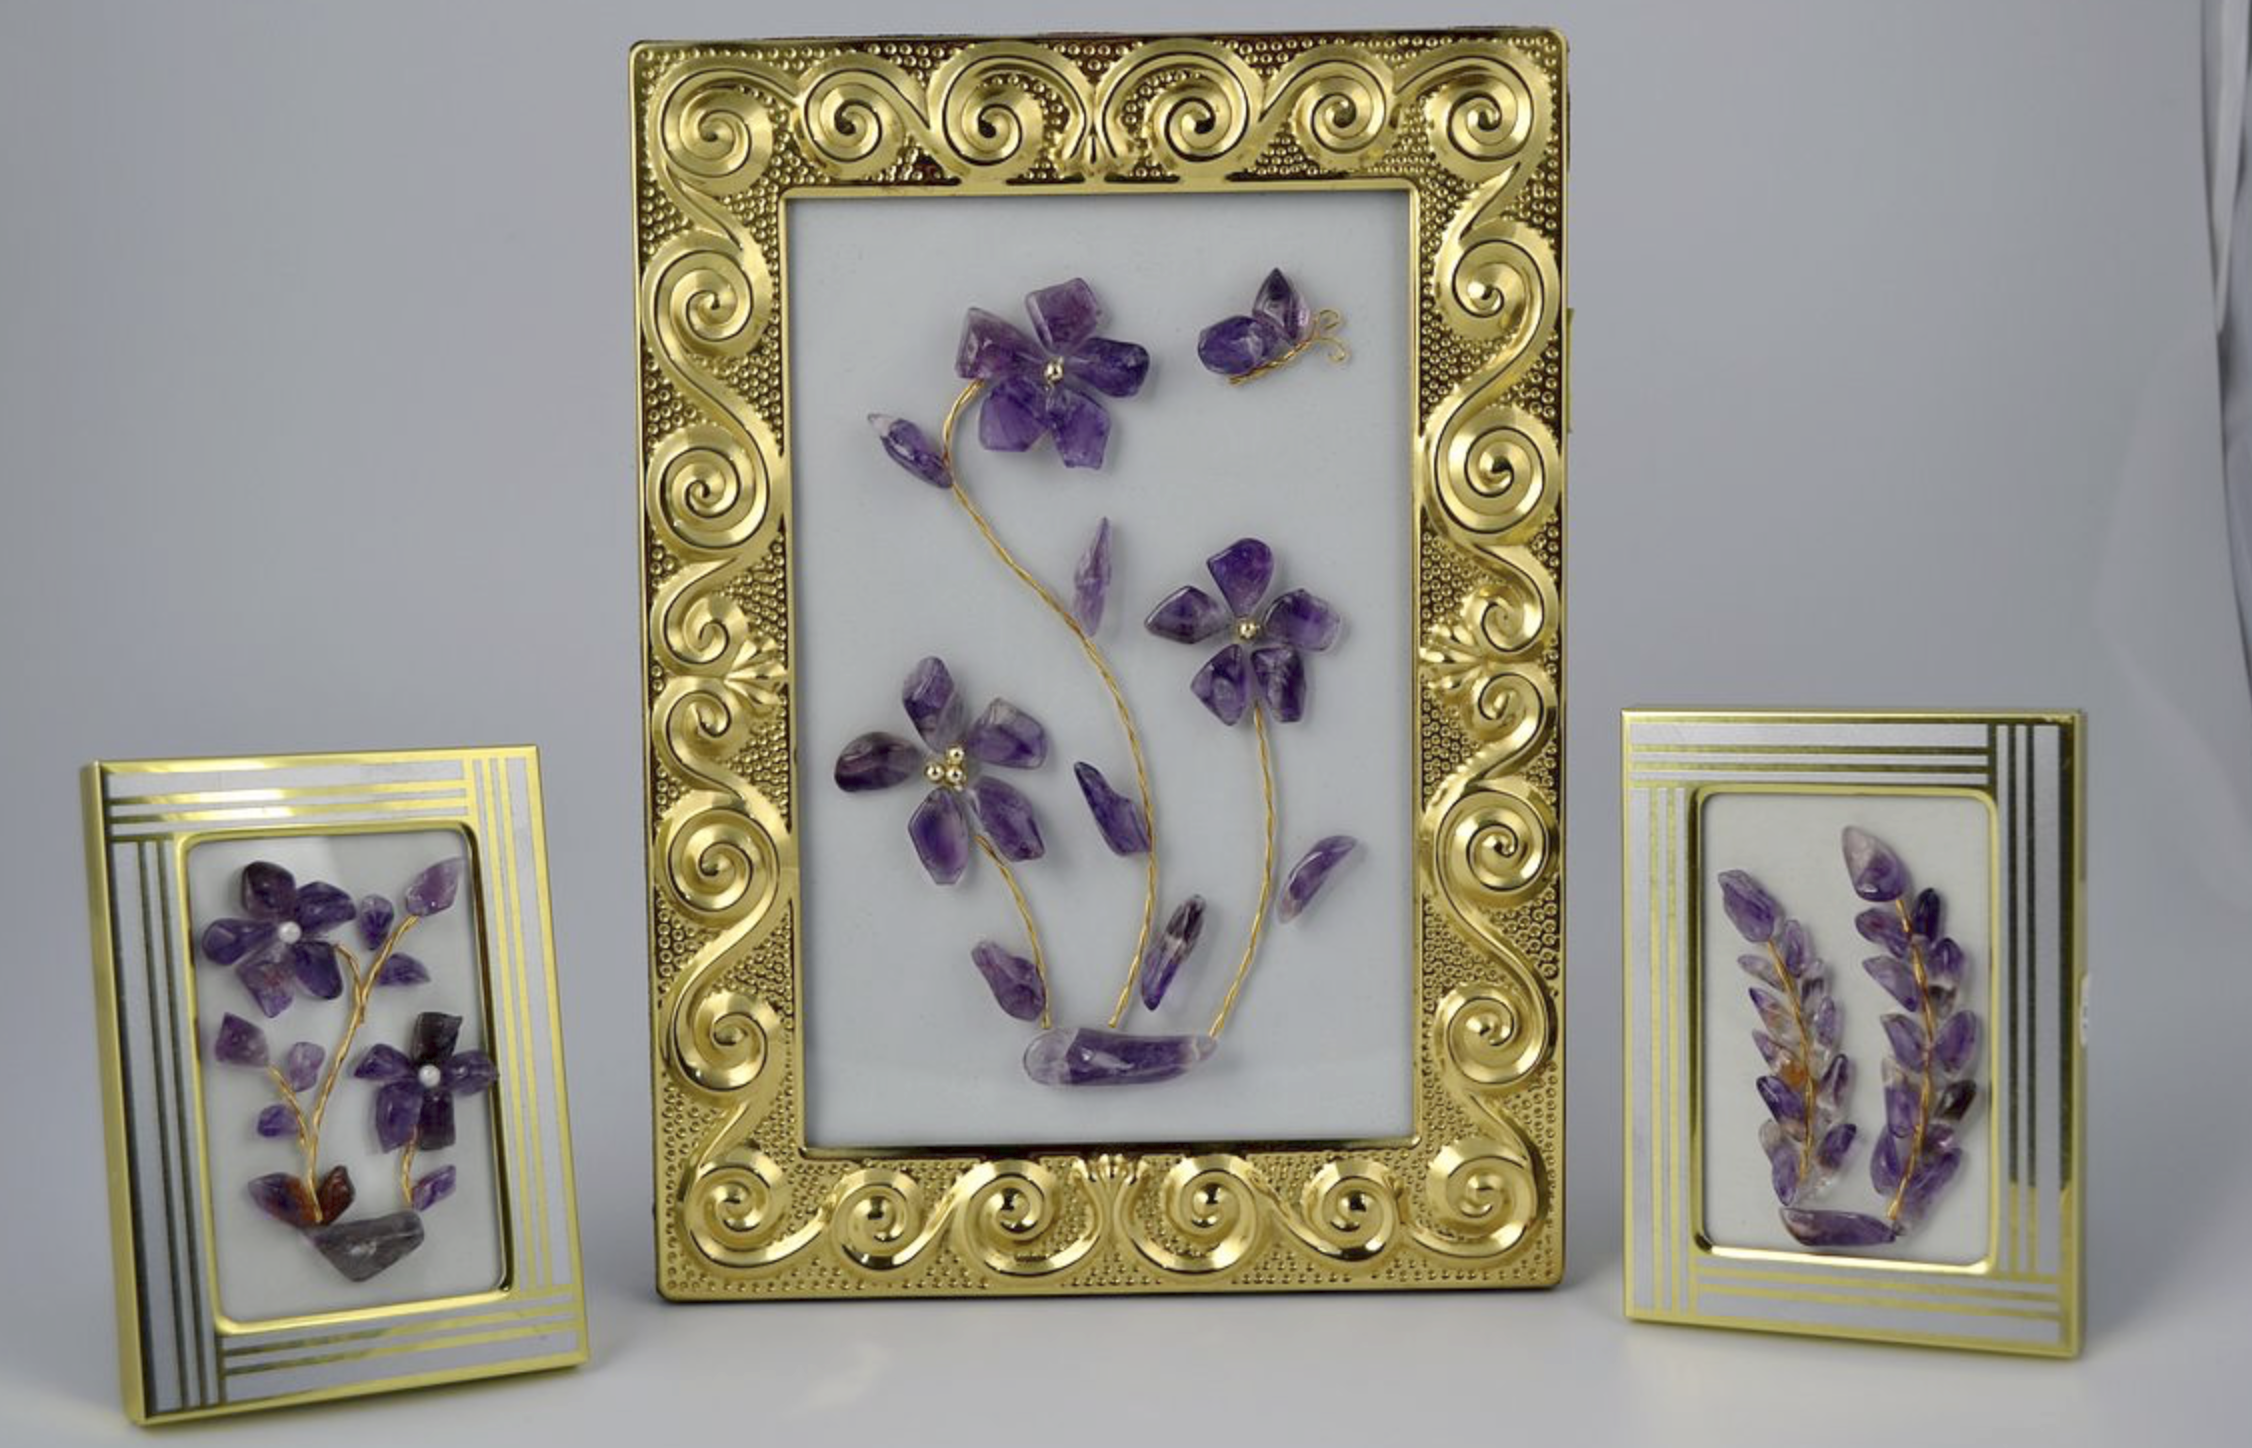 3 framed pictures made out of amethyst stones arranged into elegant floral motifs